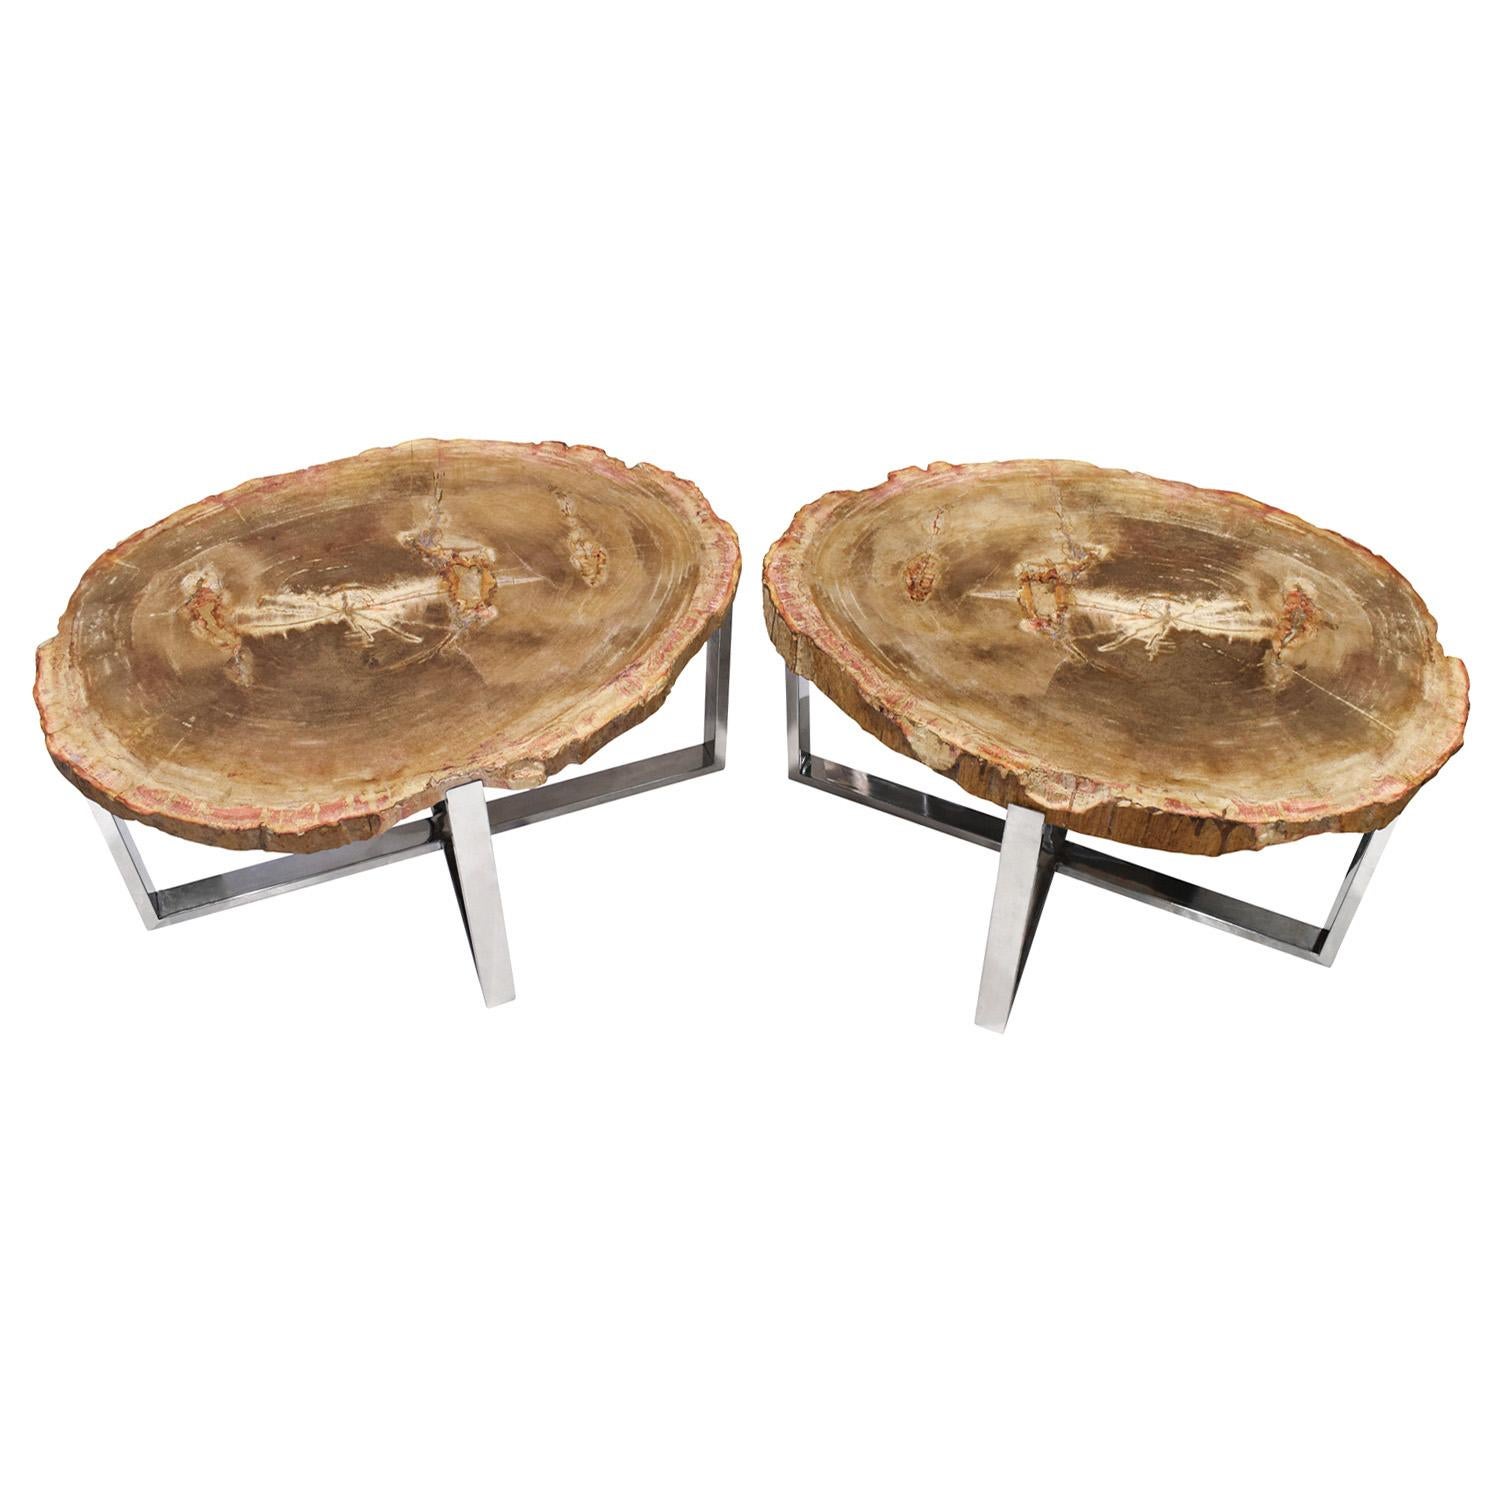 Hand-Crafted Pair of End/Coffee Tables in Polished Chrome with Petrified Wood Tops 1990s For Sale